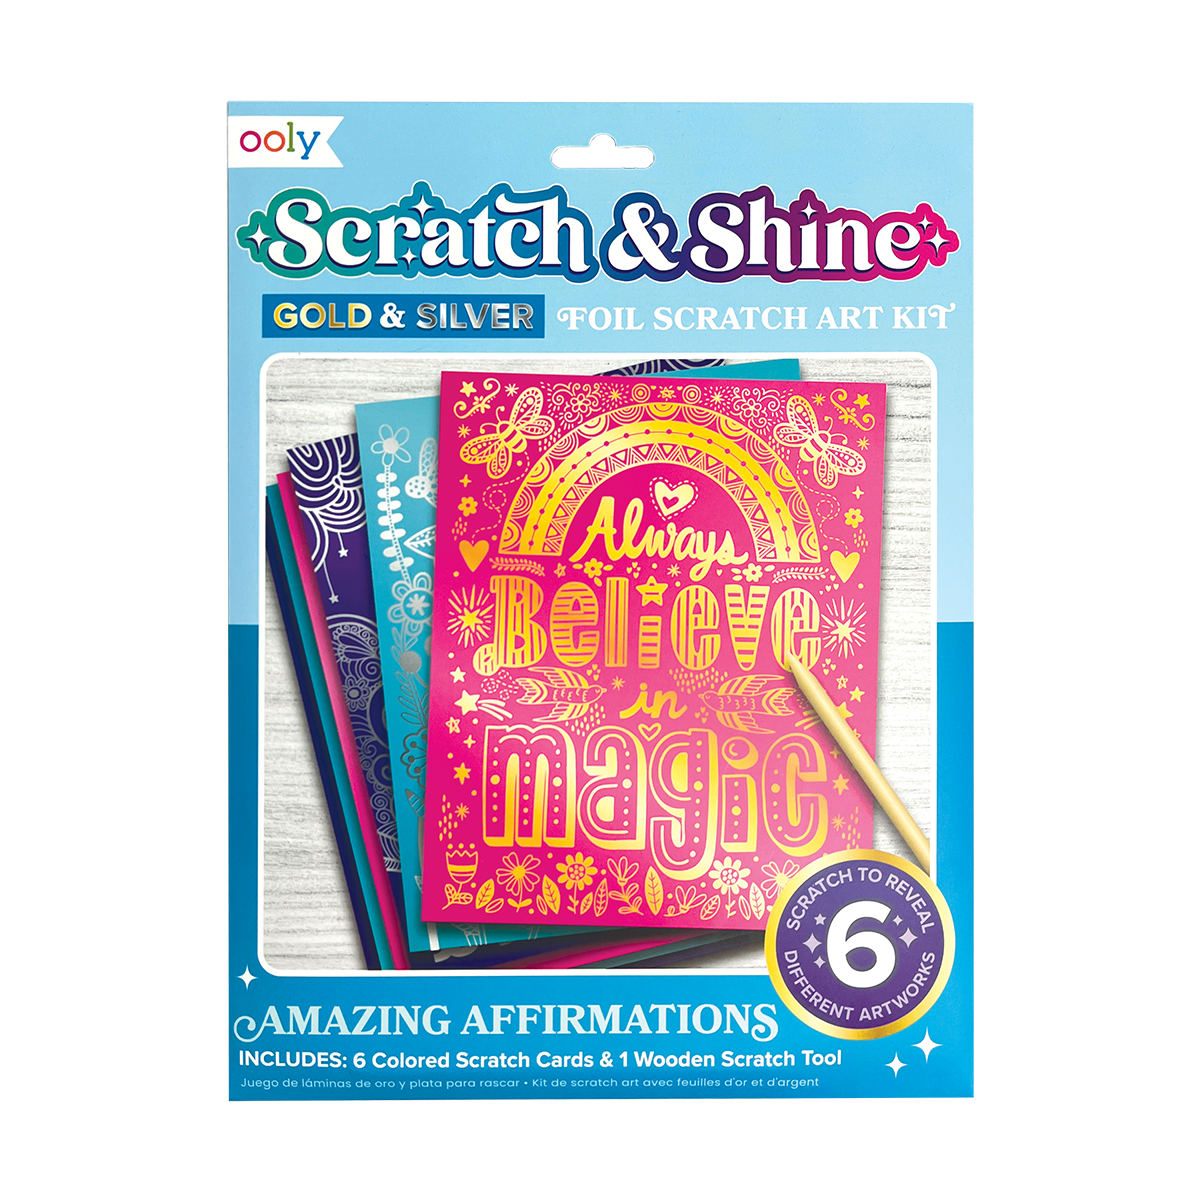 Scratch and Shine Foil Scratch Art Kit - Amazing Affirmations by OOLY